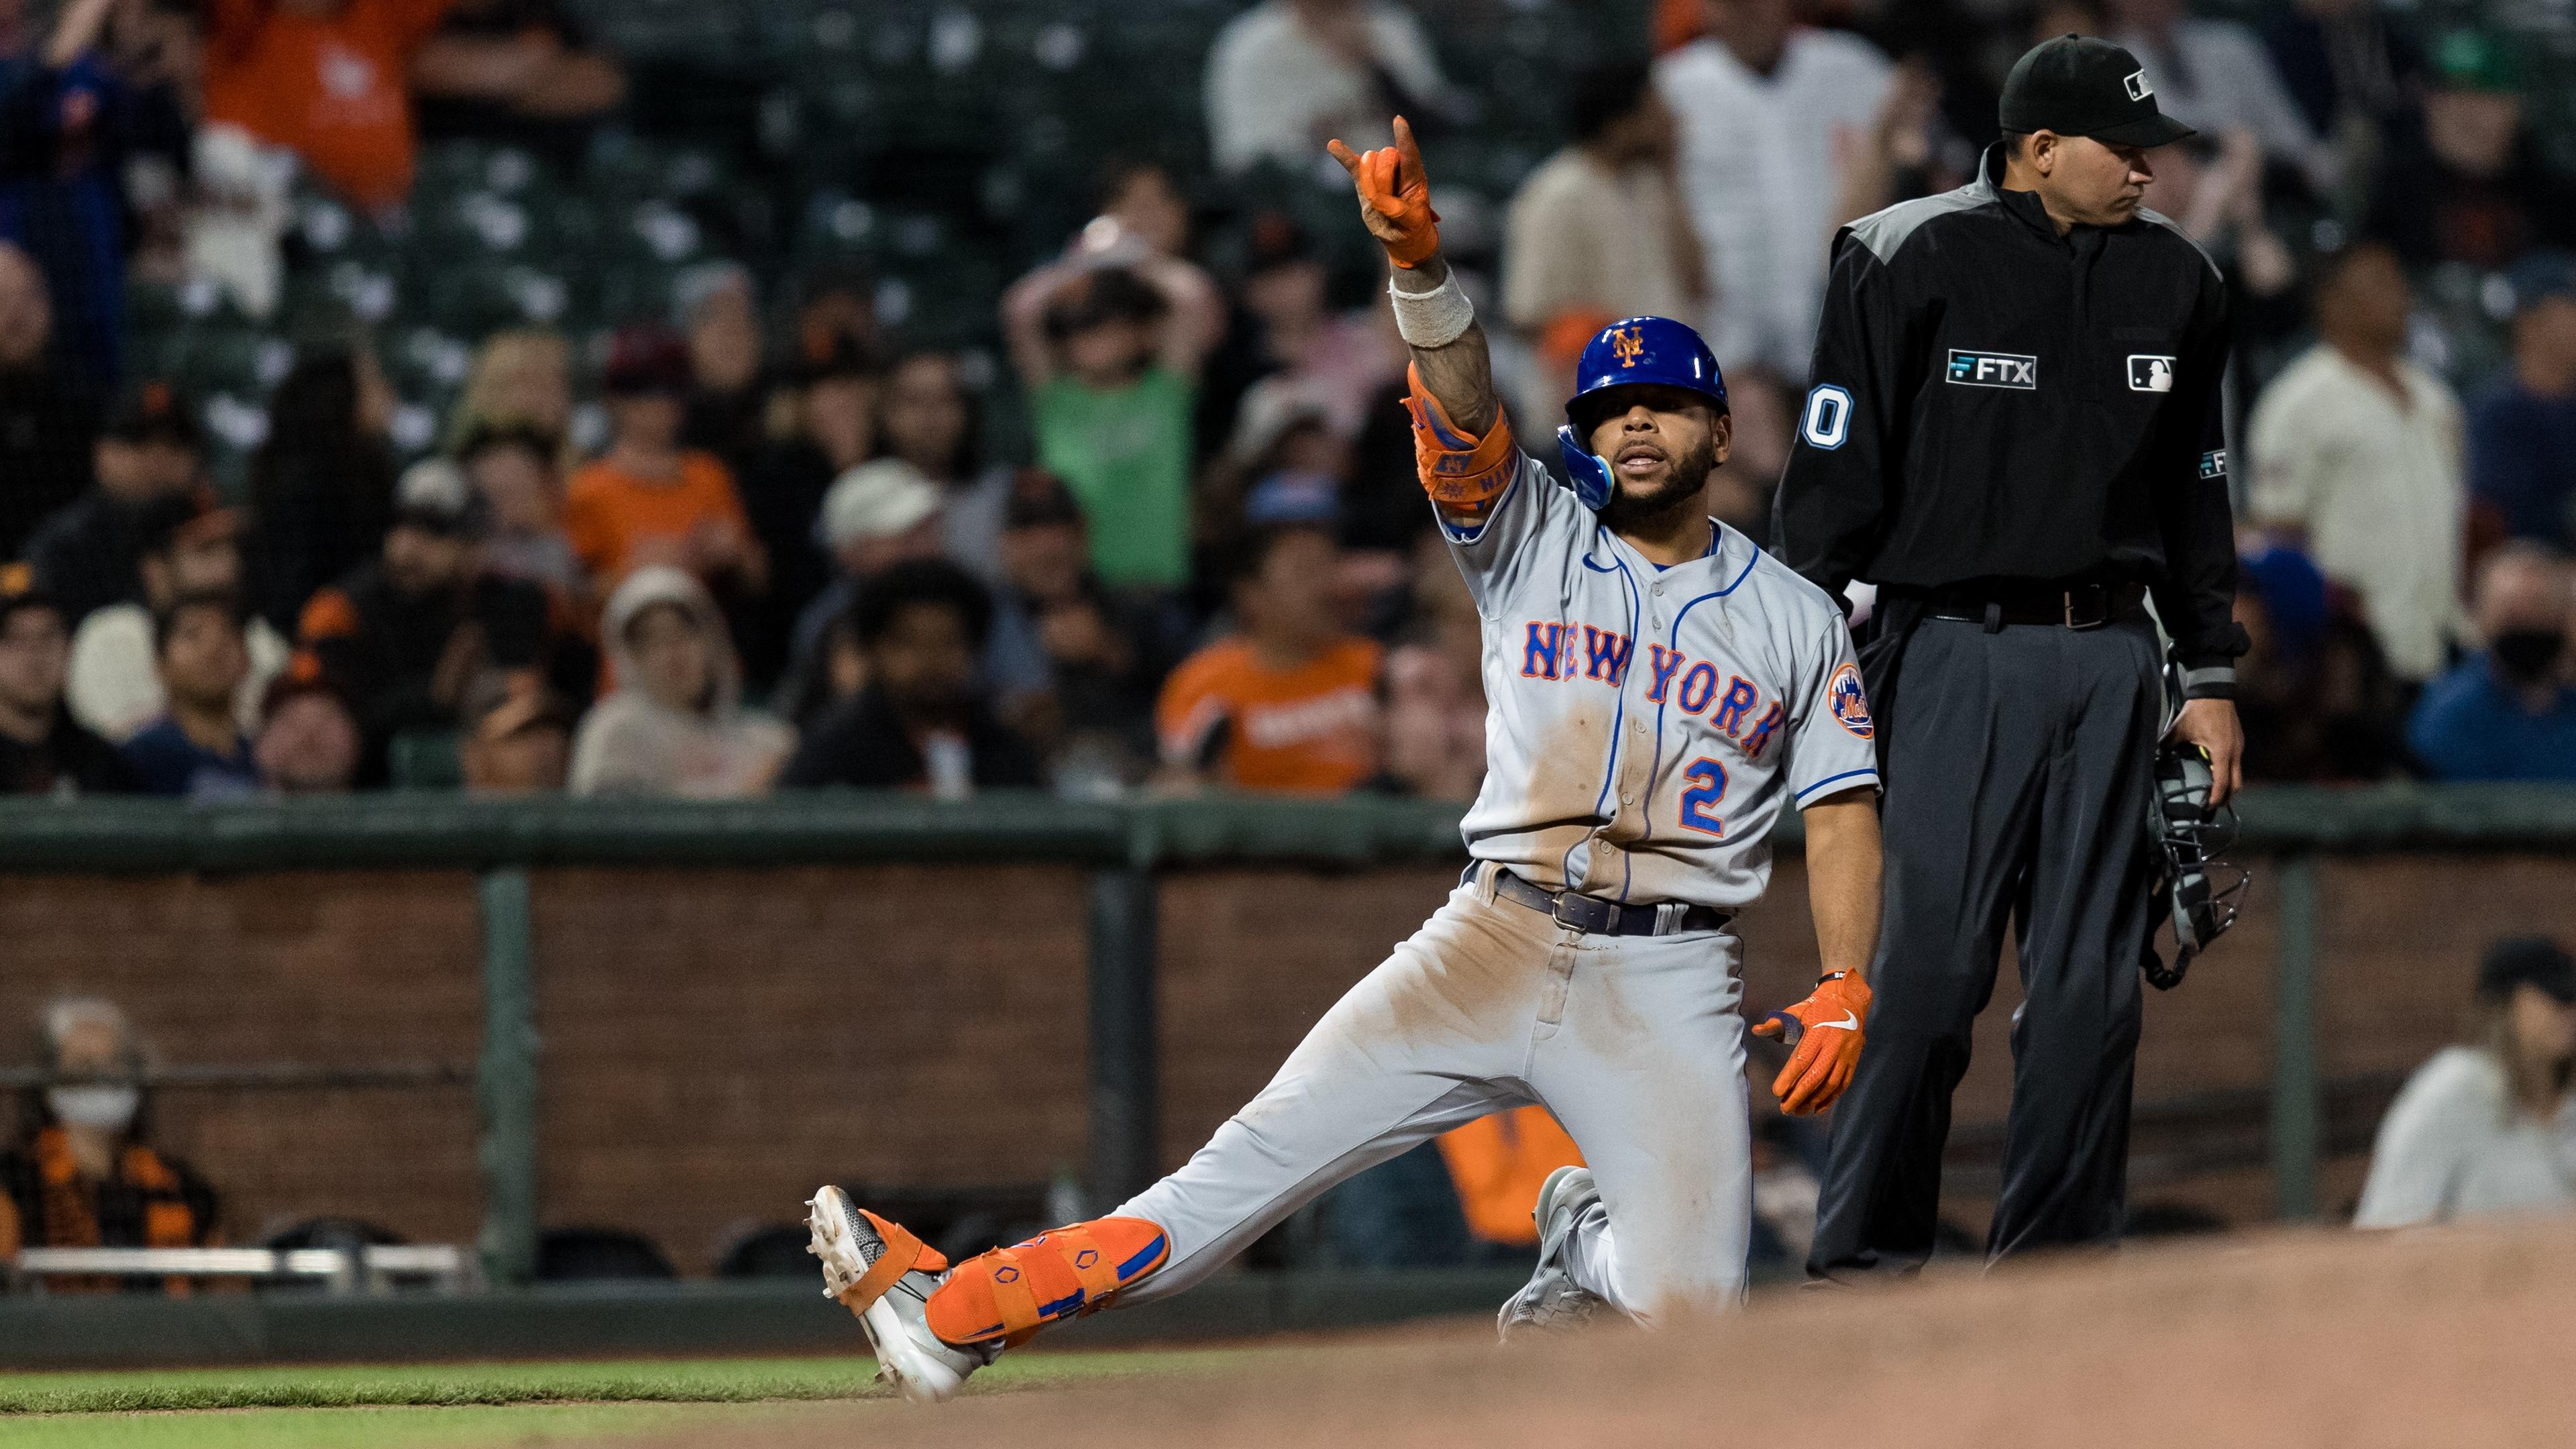 New York Mets first baseman Dominic Smith (2) reacts after hitting a staple against the San Francisco Giants during the ninth inning at Oracle Park. / John Hefti - USA TODAY Sports